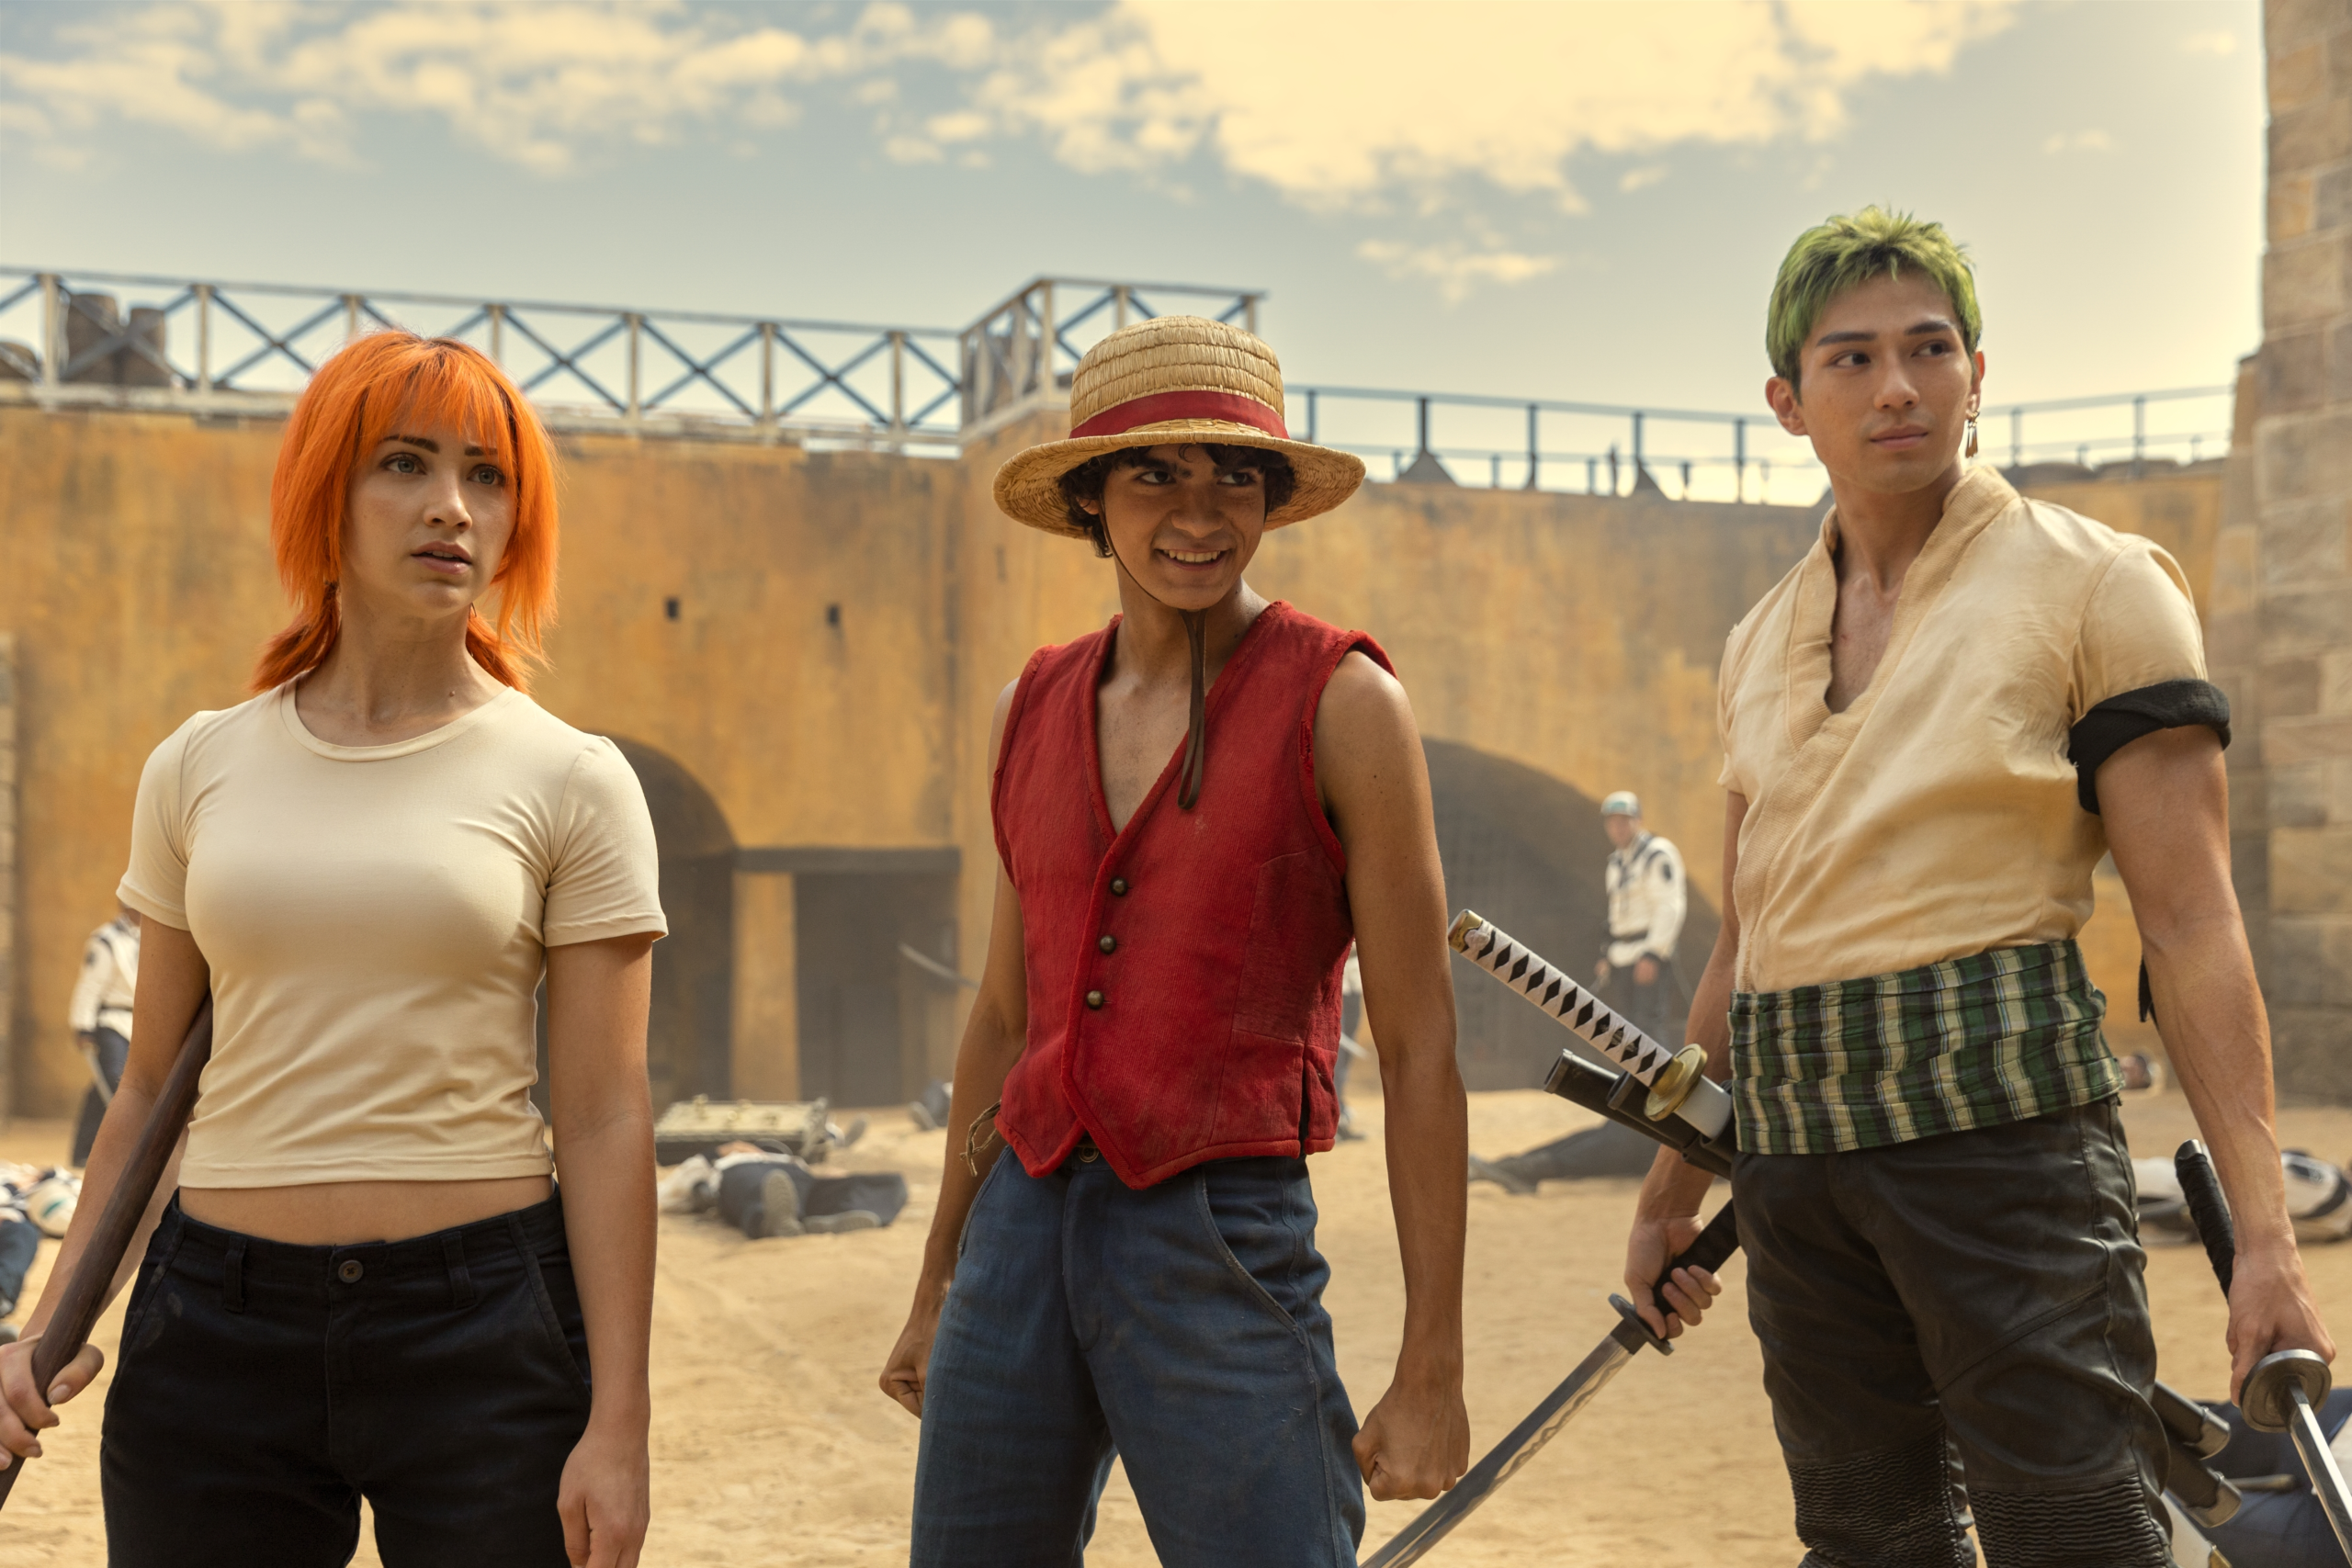 Netflix Drops One Piece Live-Action: Why You Can't Miss This Epic Adventure Series